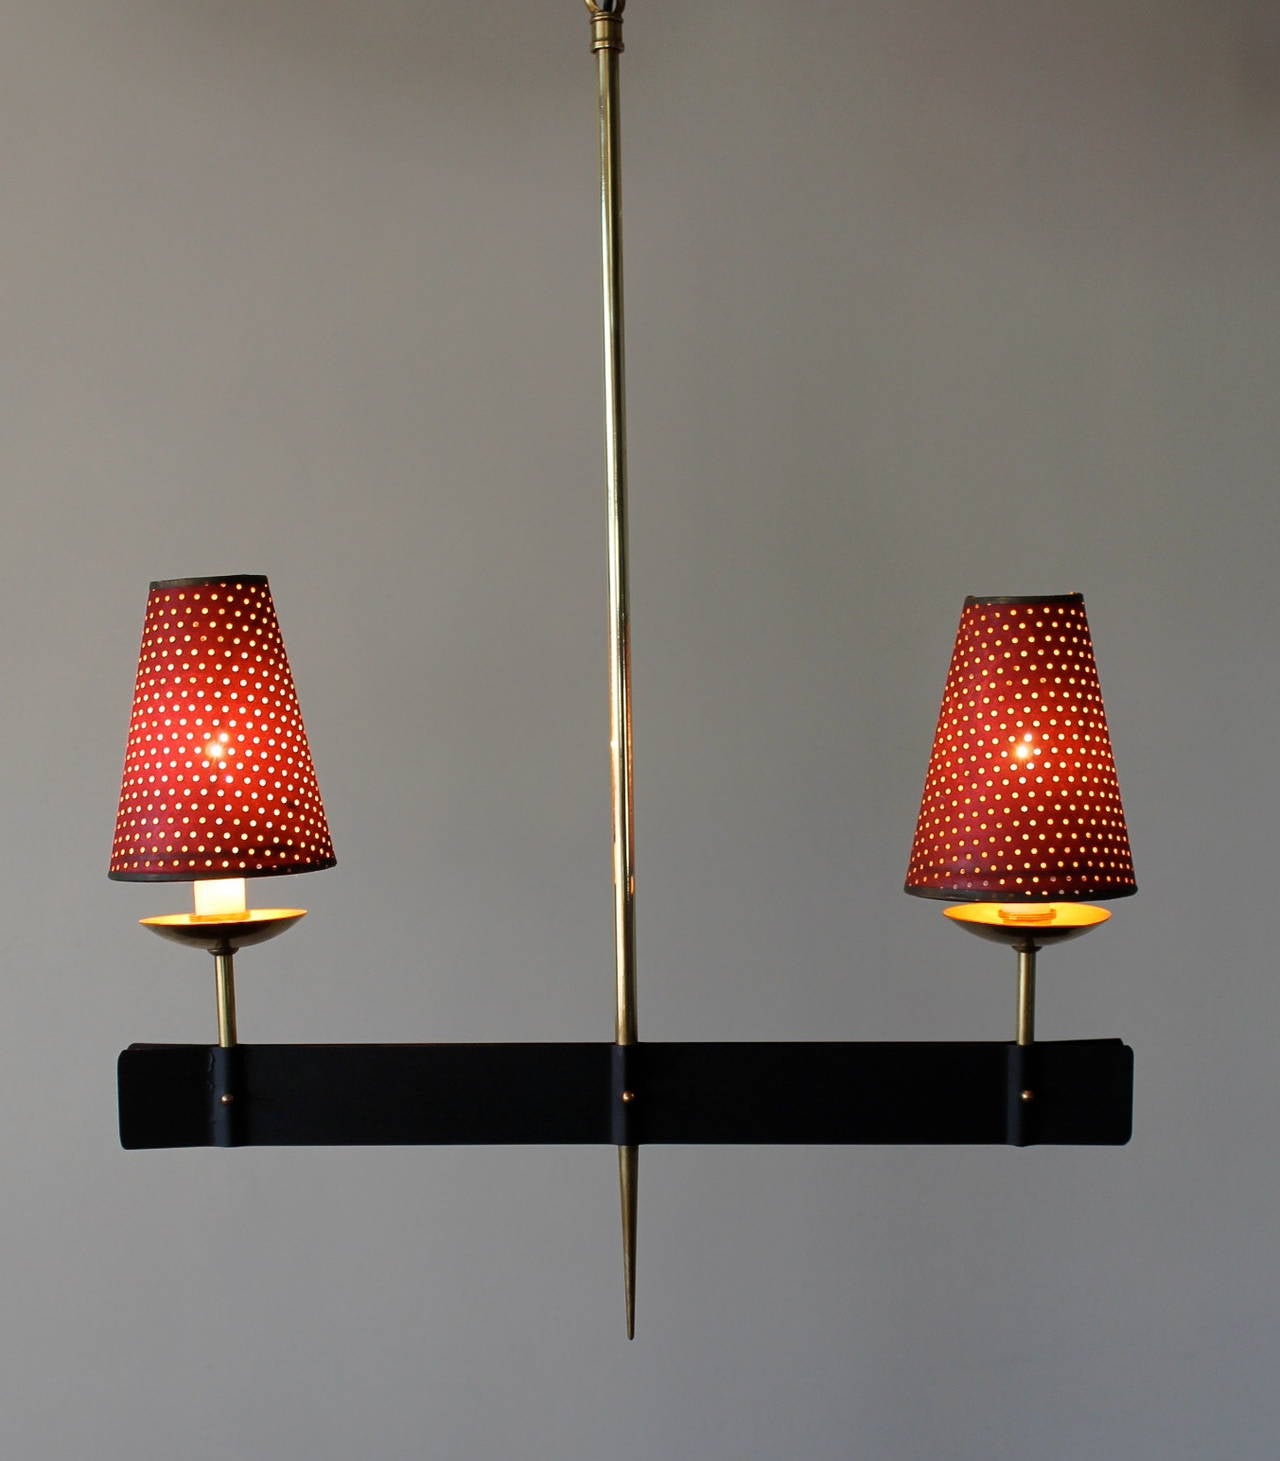 Hanging French lamp made of brass and iron with two lights covered with petite perforated paper shades in a vintage burgundy color. A solid brass slender spear in middle with an iron bar crossing over on the bottom holding a lamp on each side.